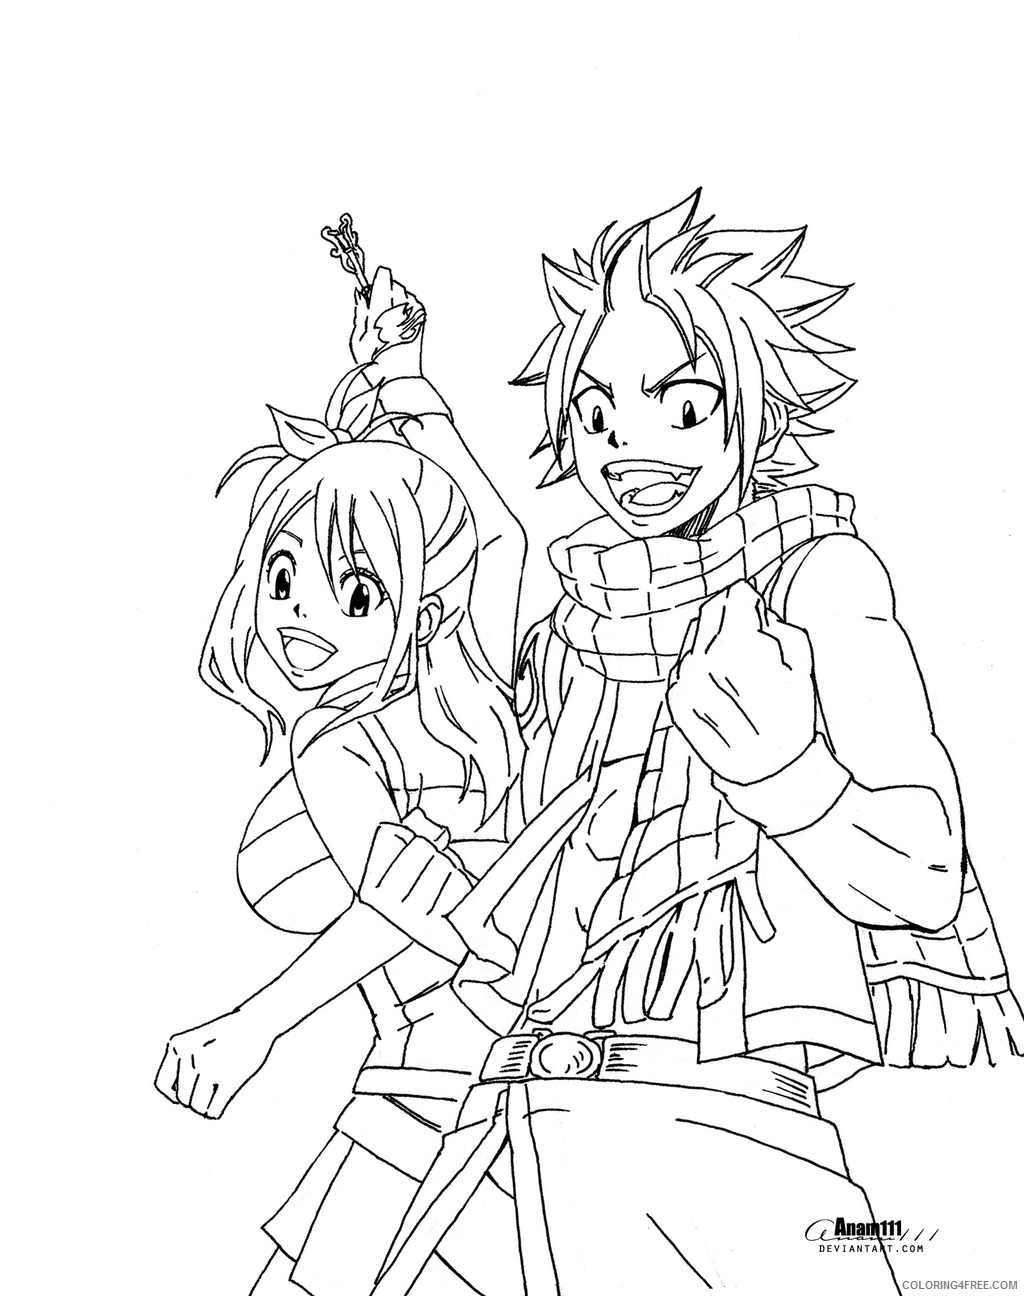 Natsu Dragneel Coloring Pages - Coloring Home